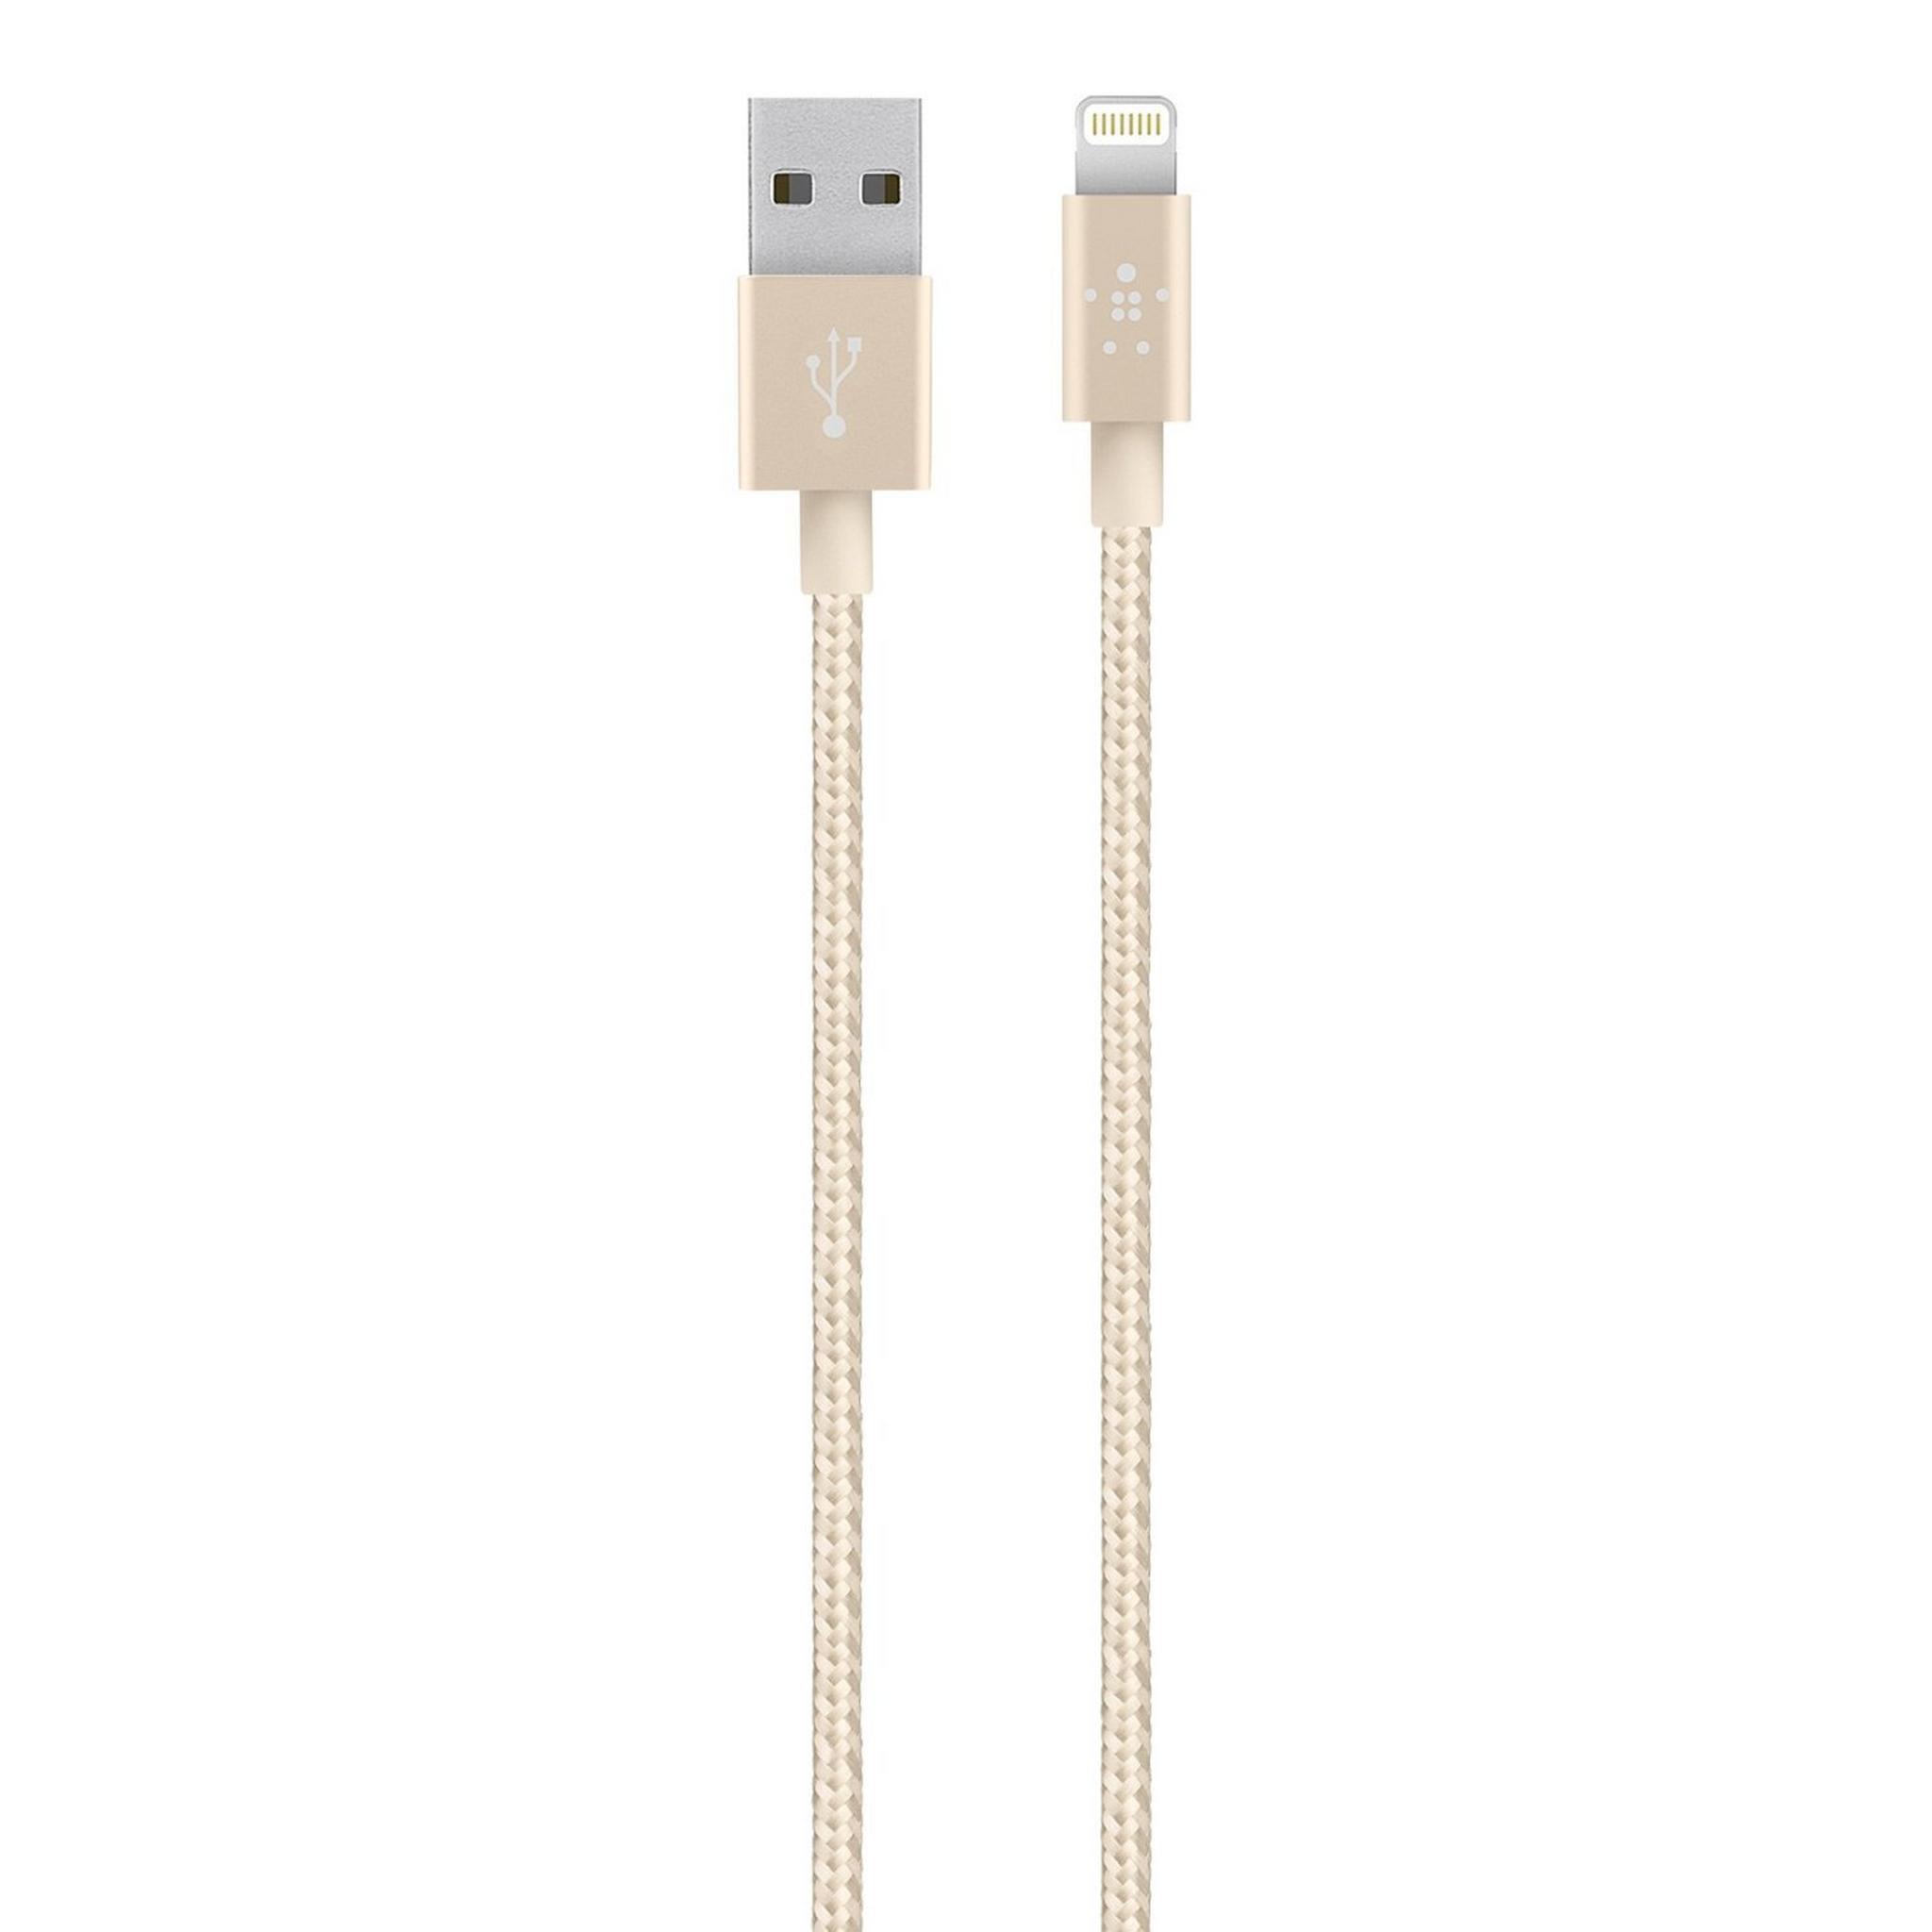 Belkin Apple MFi-Certified 2.4 Amp MIXIT 4-Foot Premium Metallic Lightning to USB ChargeSync Cable - Gold